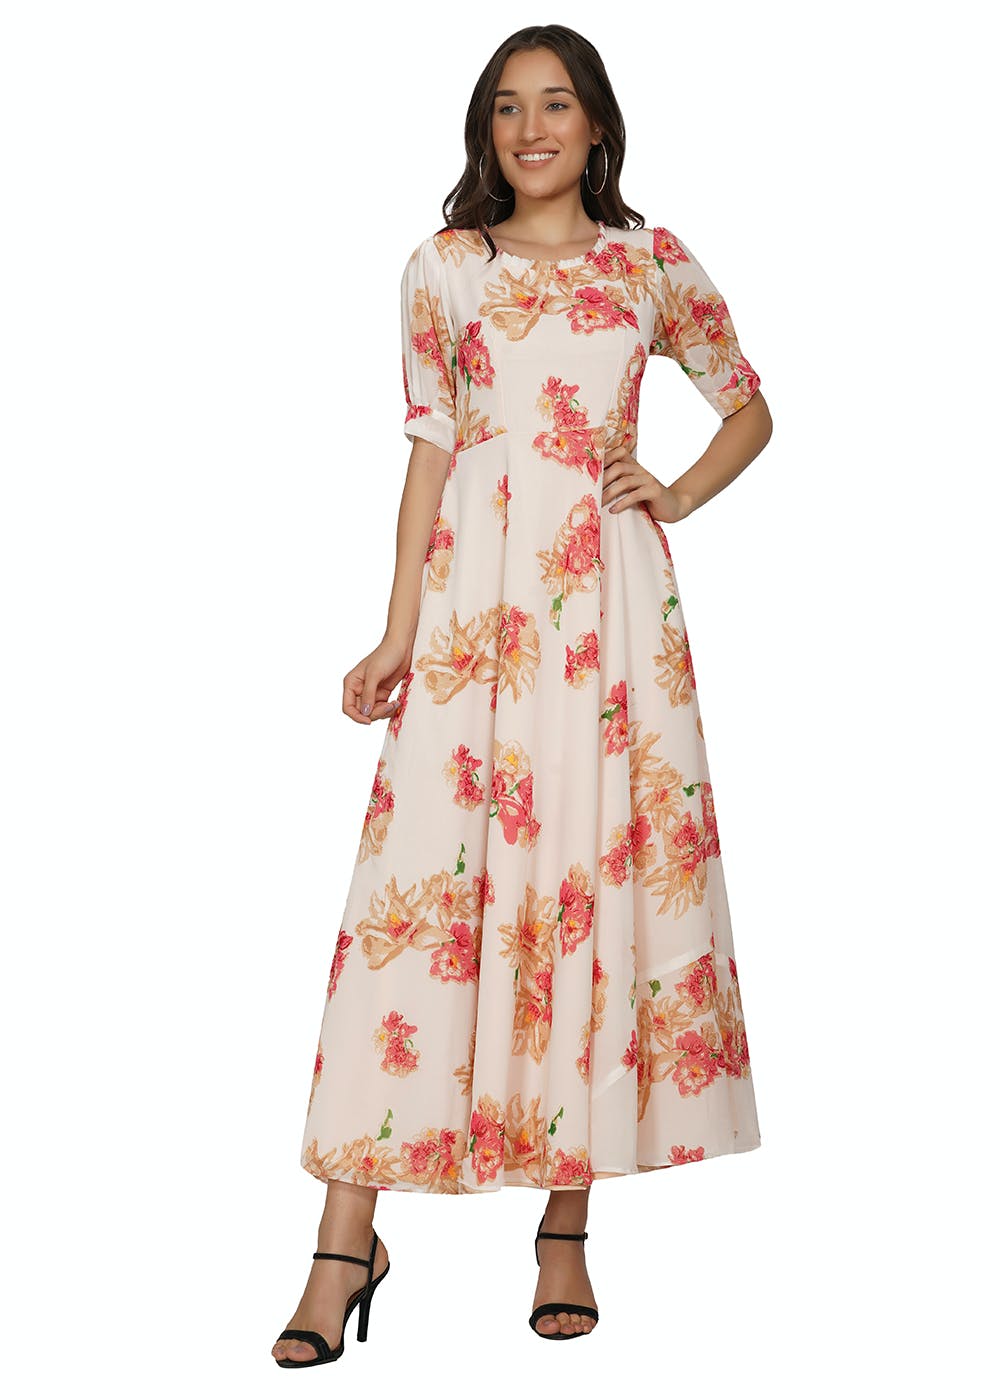 Get Floral Printed Off-White Georgette Dress at ₹ 1199 | LBB Shop